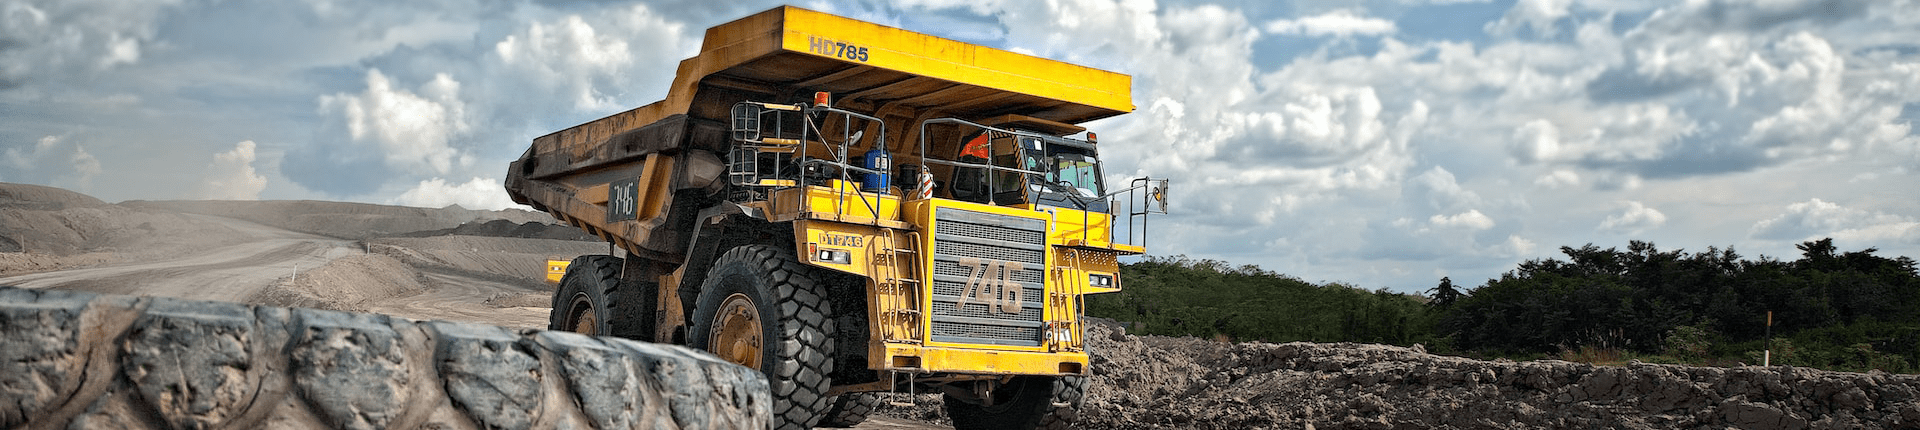 yellow truck on a coal mine